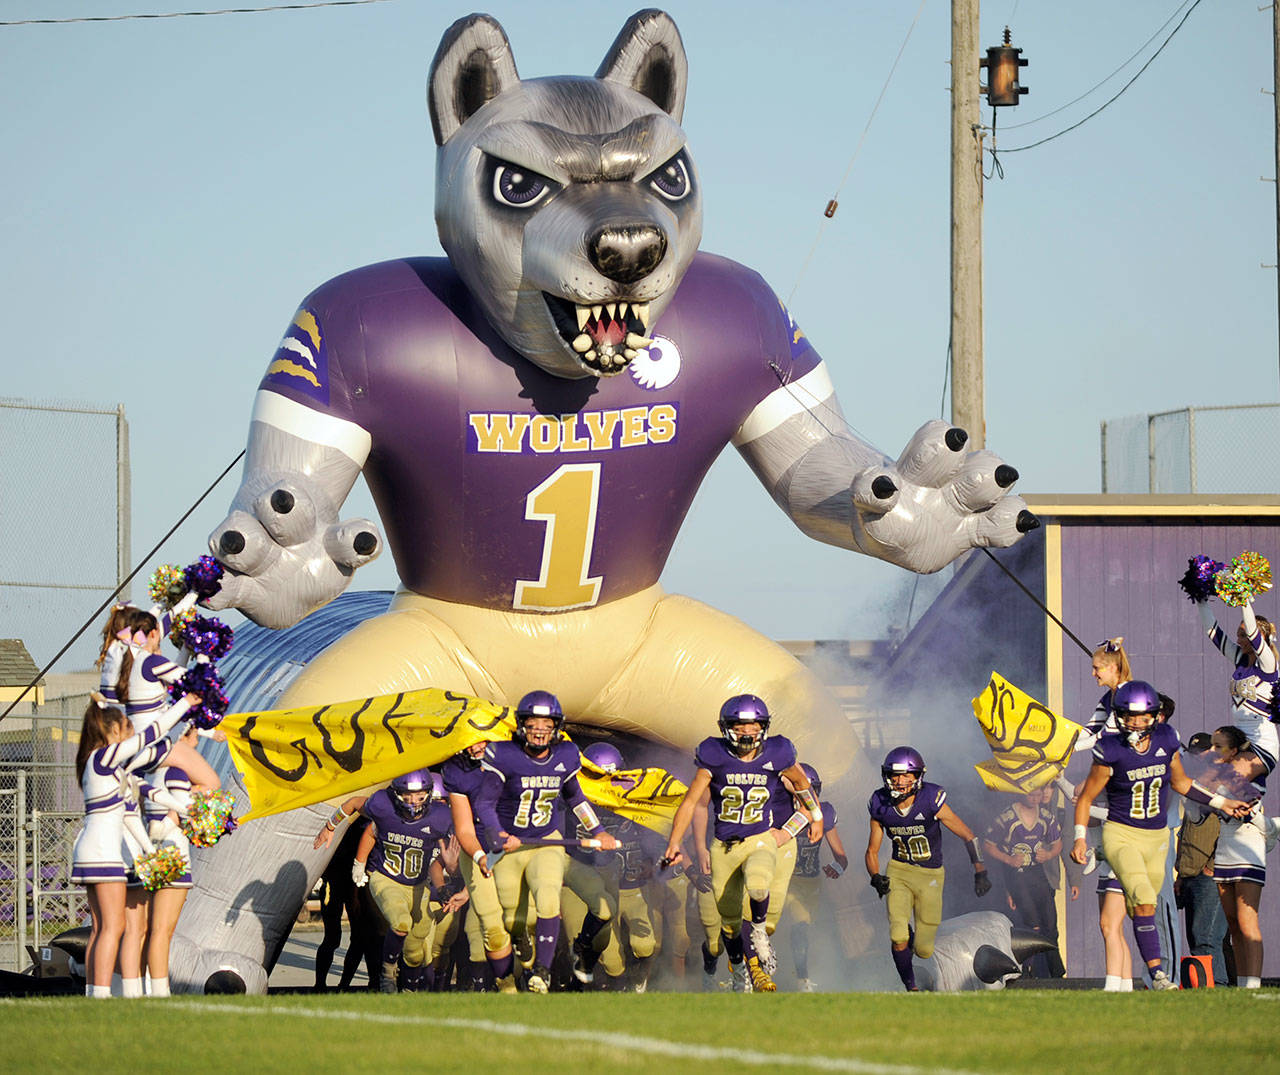 Sequim football players run out of the tunnel before their 2019 season opener against Washington last September. Sequim Gazette file photo by Michael Dashiell